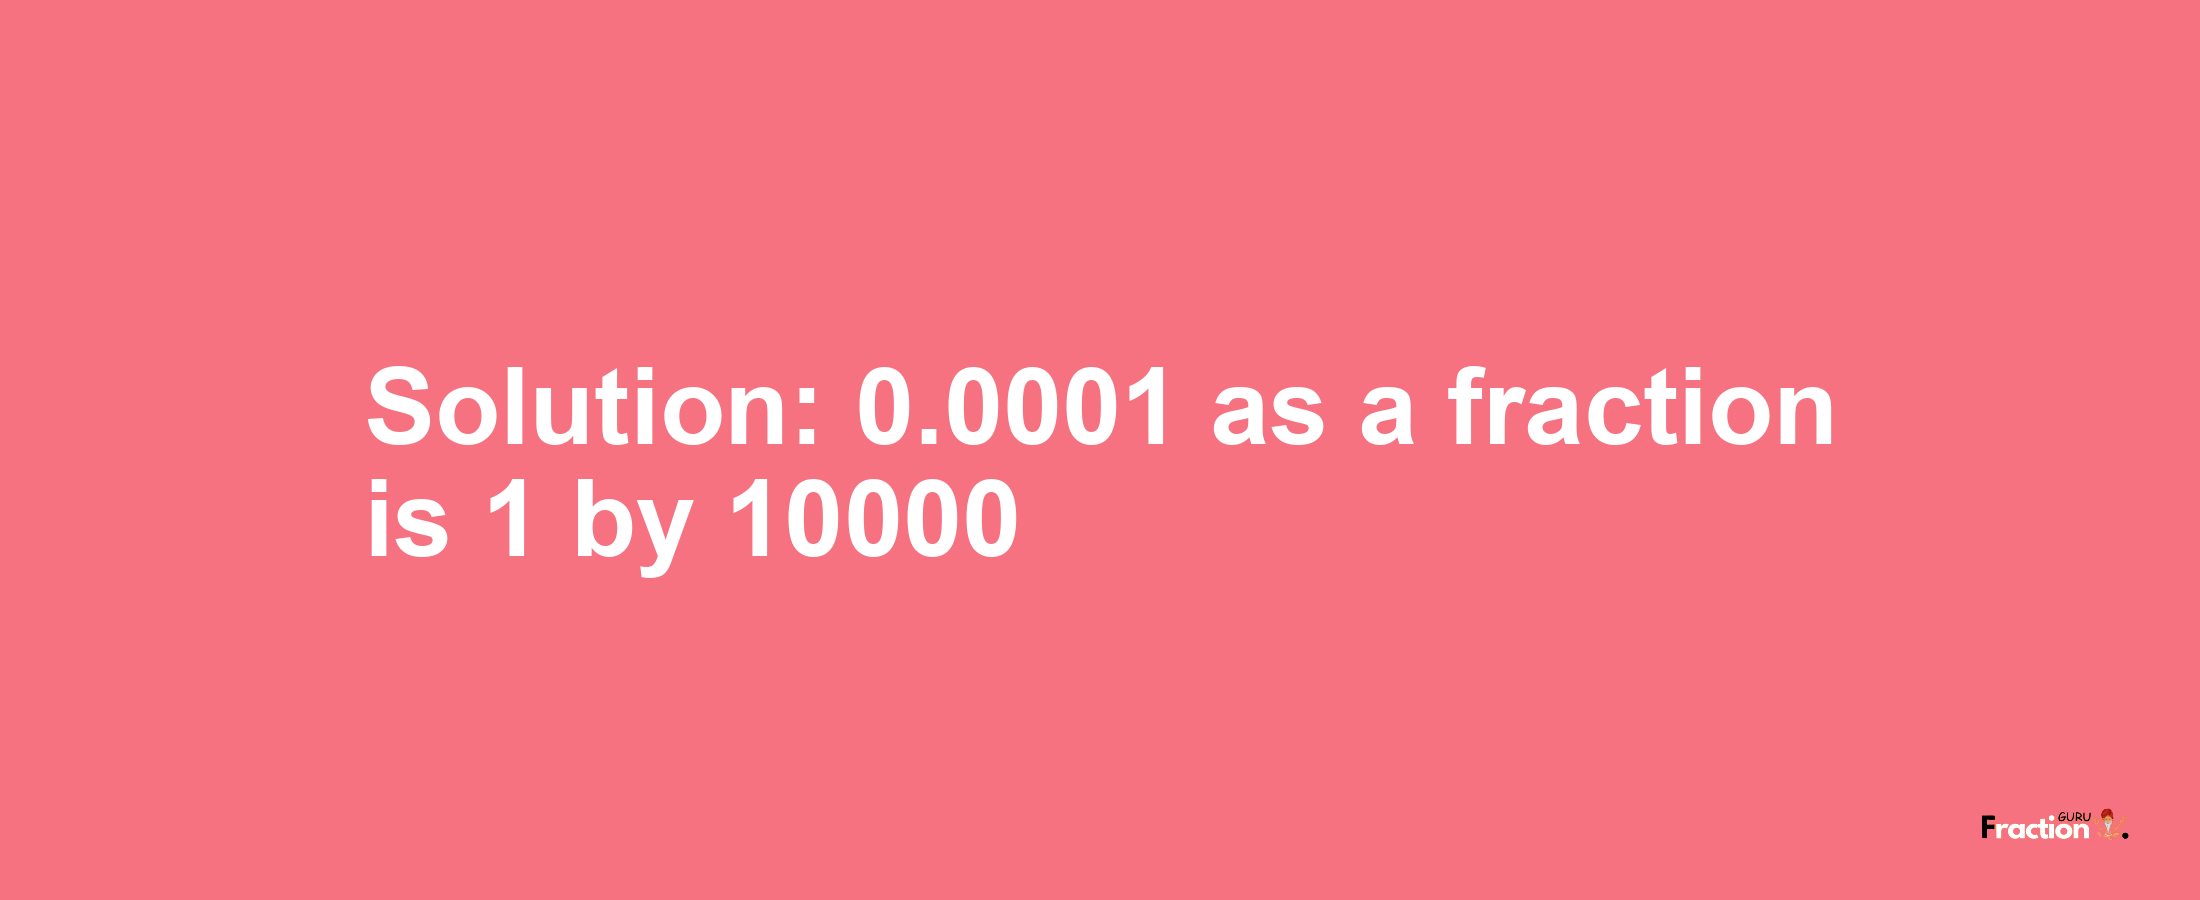 Solution:0.0001 as a fraction is 1/10000